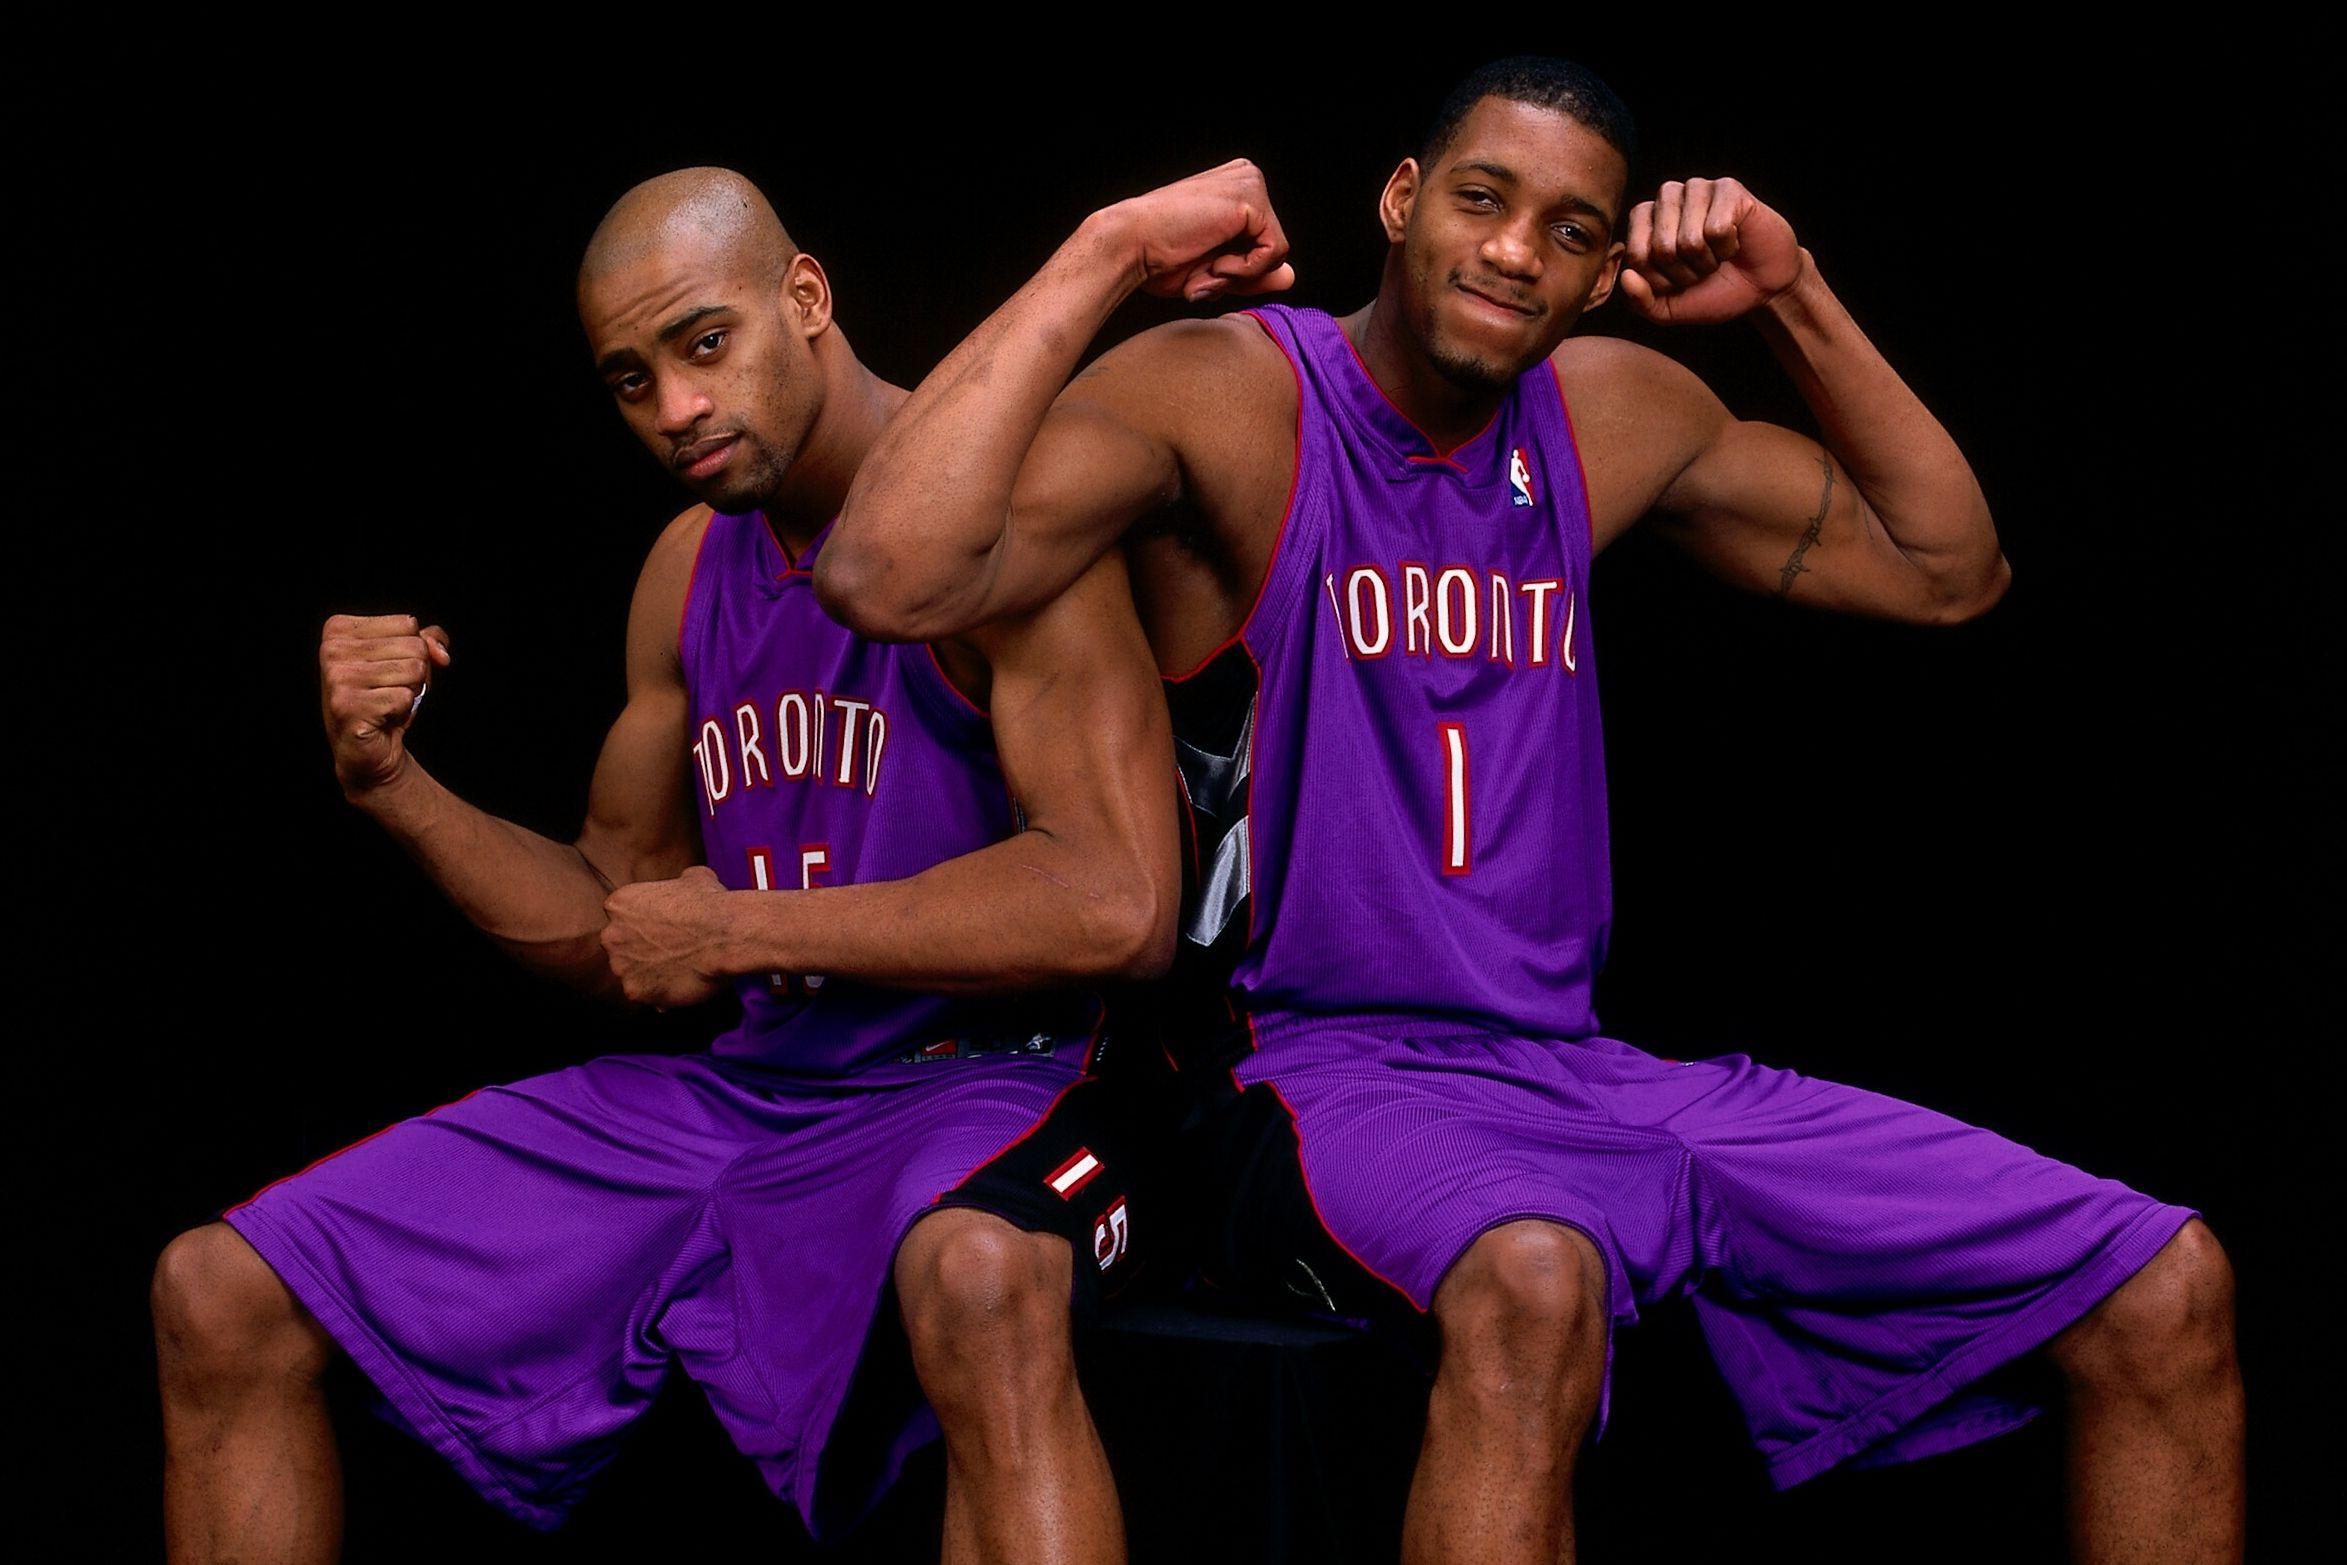 Vince Carter Vs Tracy Mcgrady Wallpapers Top Free Vince Carter Images, Photos, Reviews